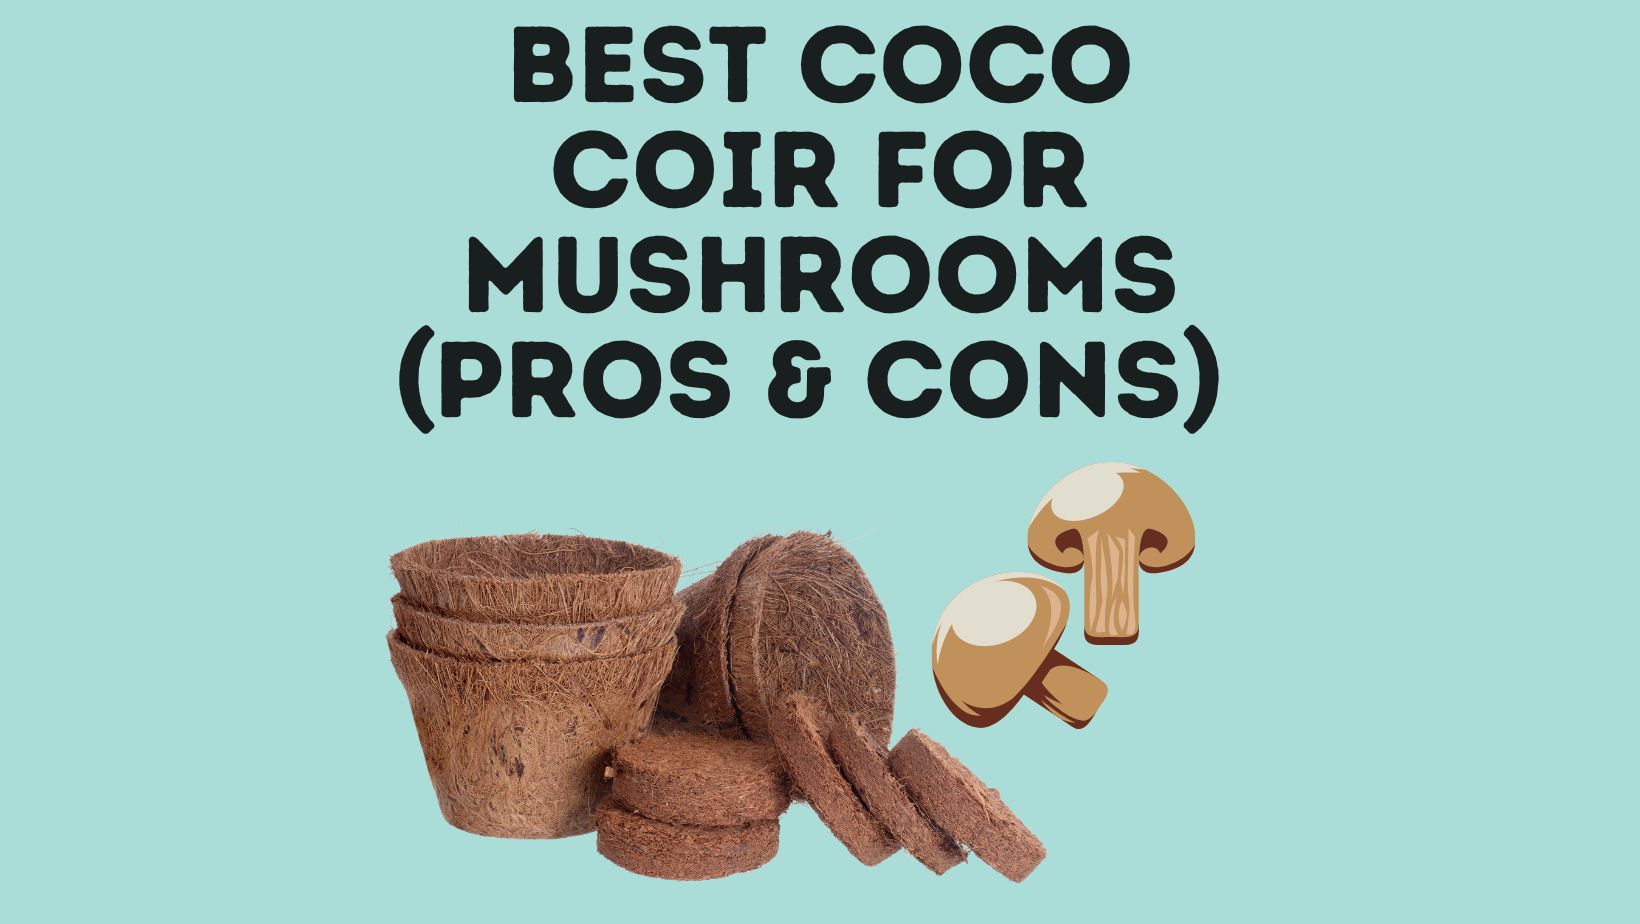 Best Coco Coir For Mushrooms